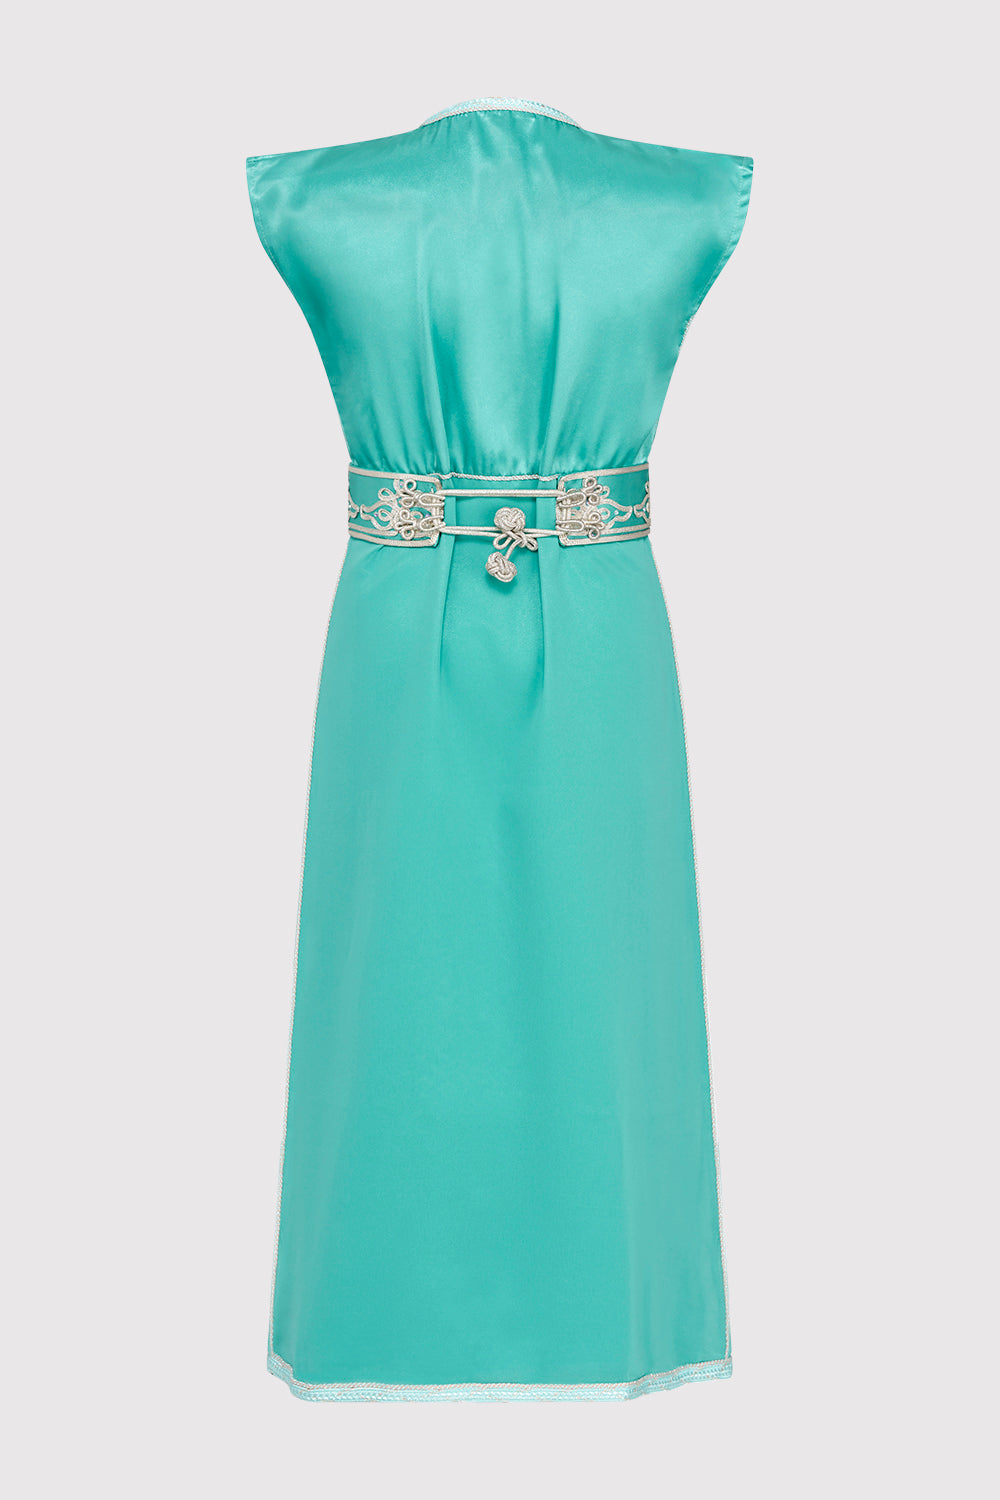 Kaftan Radia Girl's Embroidered Occasion Wear Party Sleeveless Dress and Waist Belt in Satin Light Green (2-12yrs)